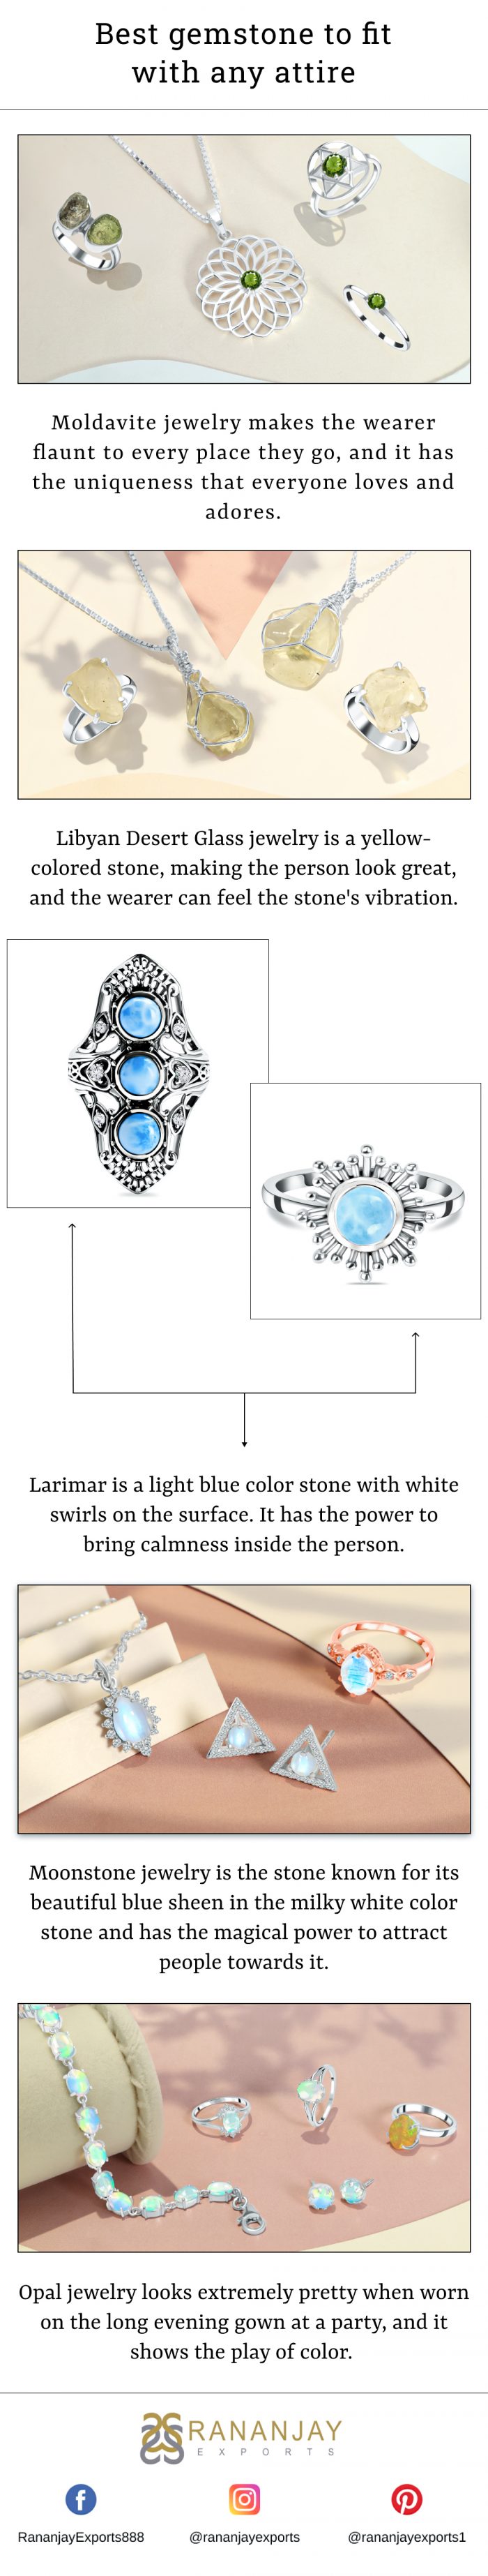 Opal Ring- Best Gemstone To Fit With Any Attire